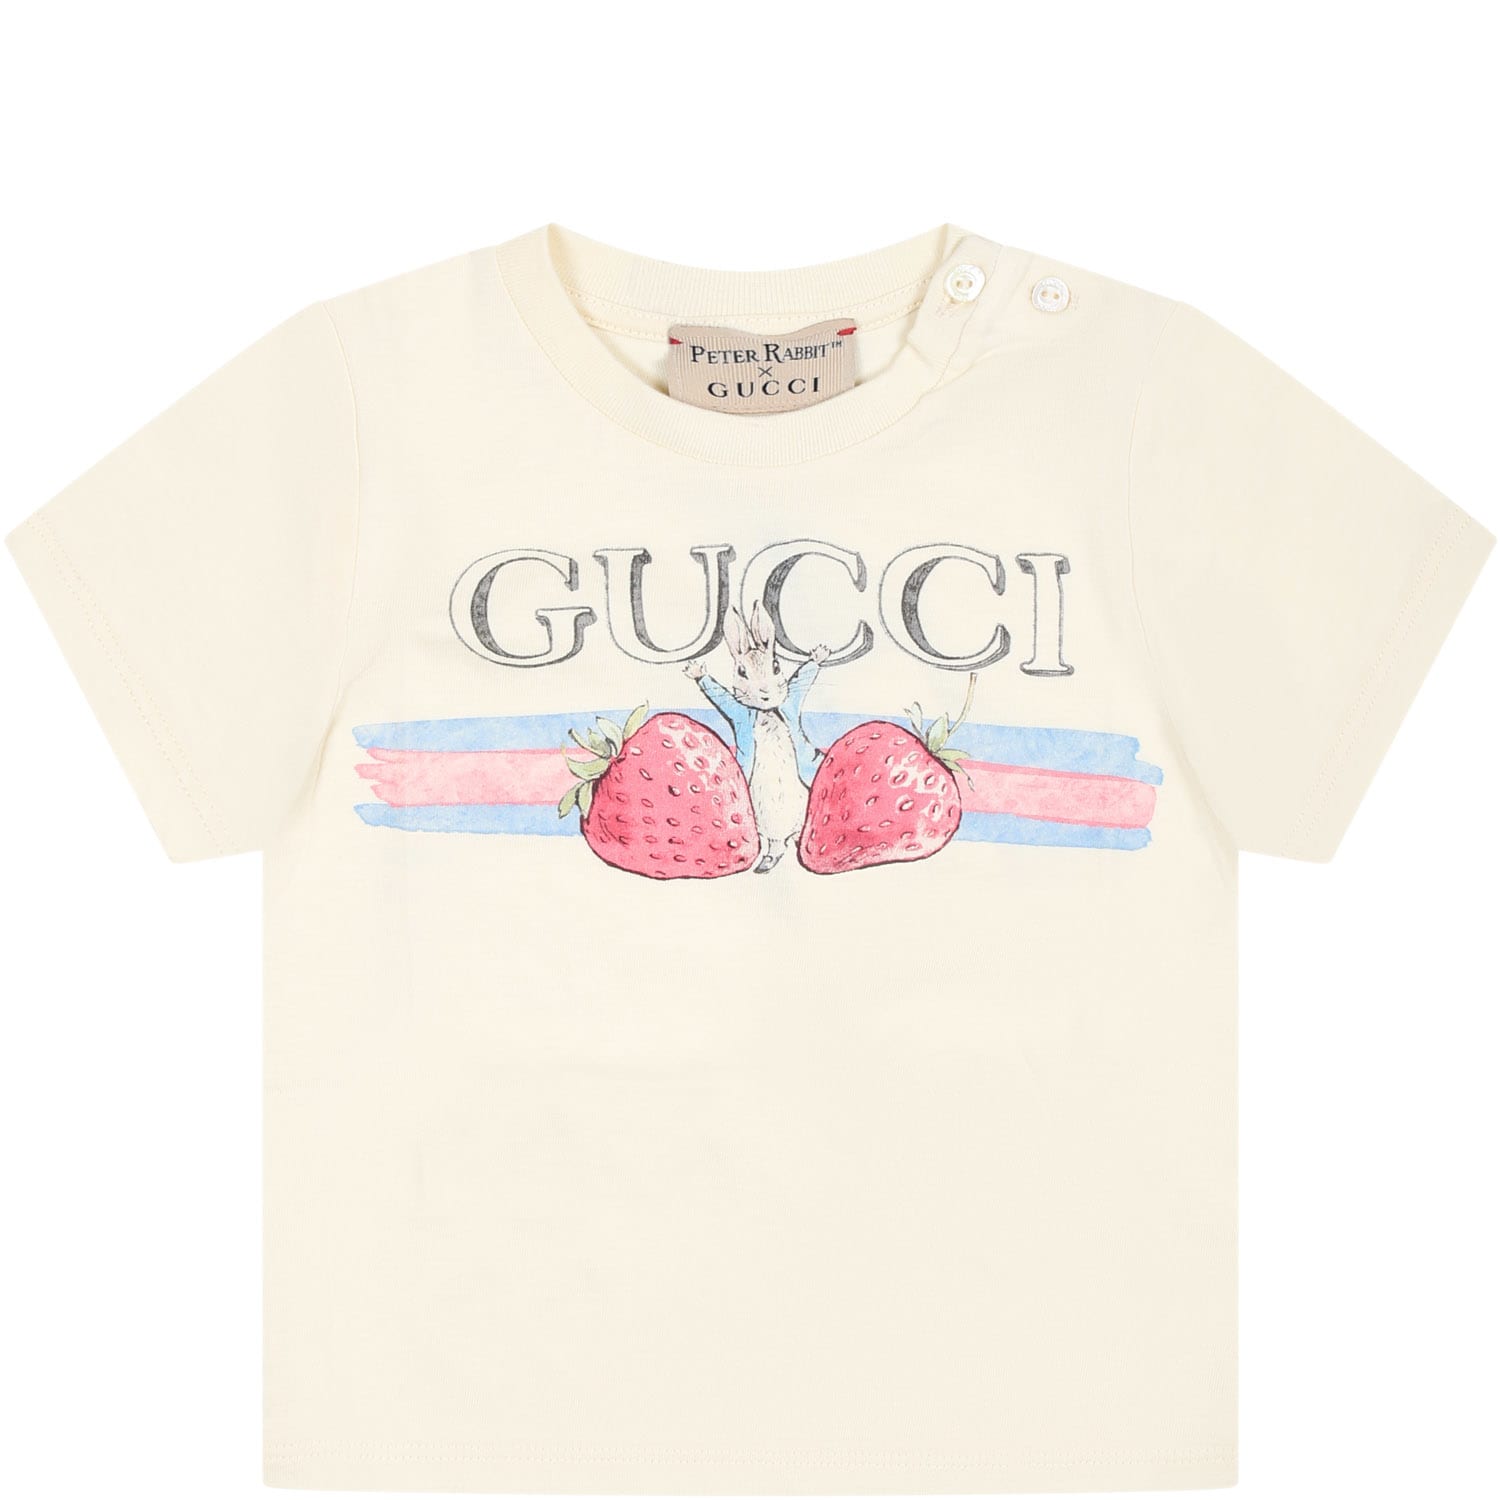 Shop Gucci Ivory T-shirt For Baby Girl With Peter Rabbit